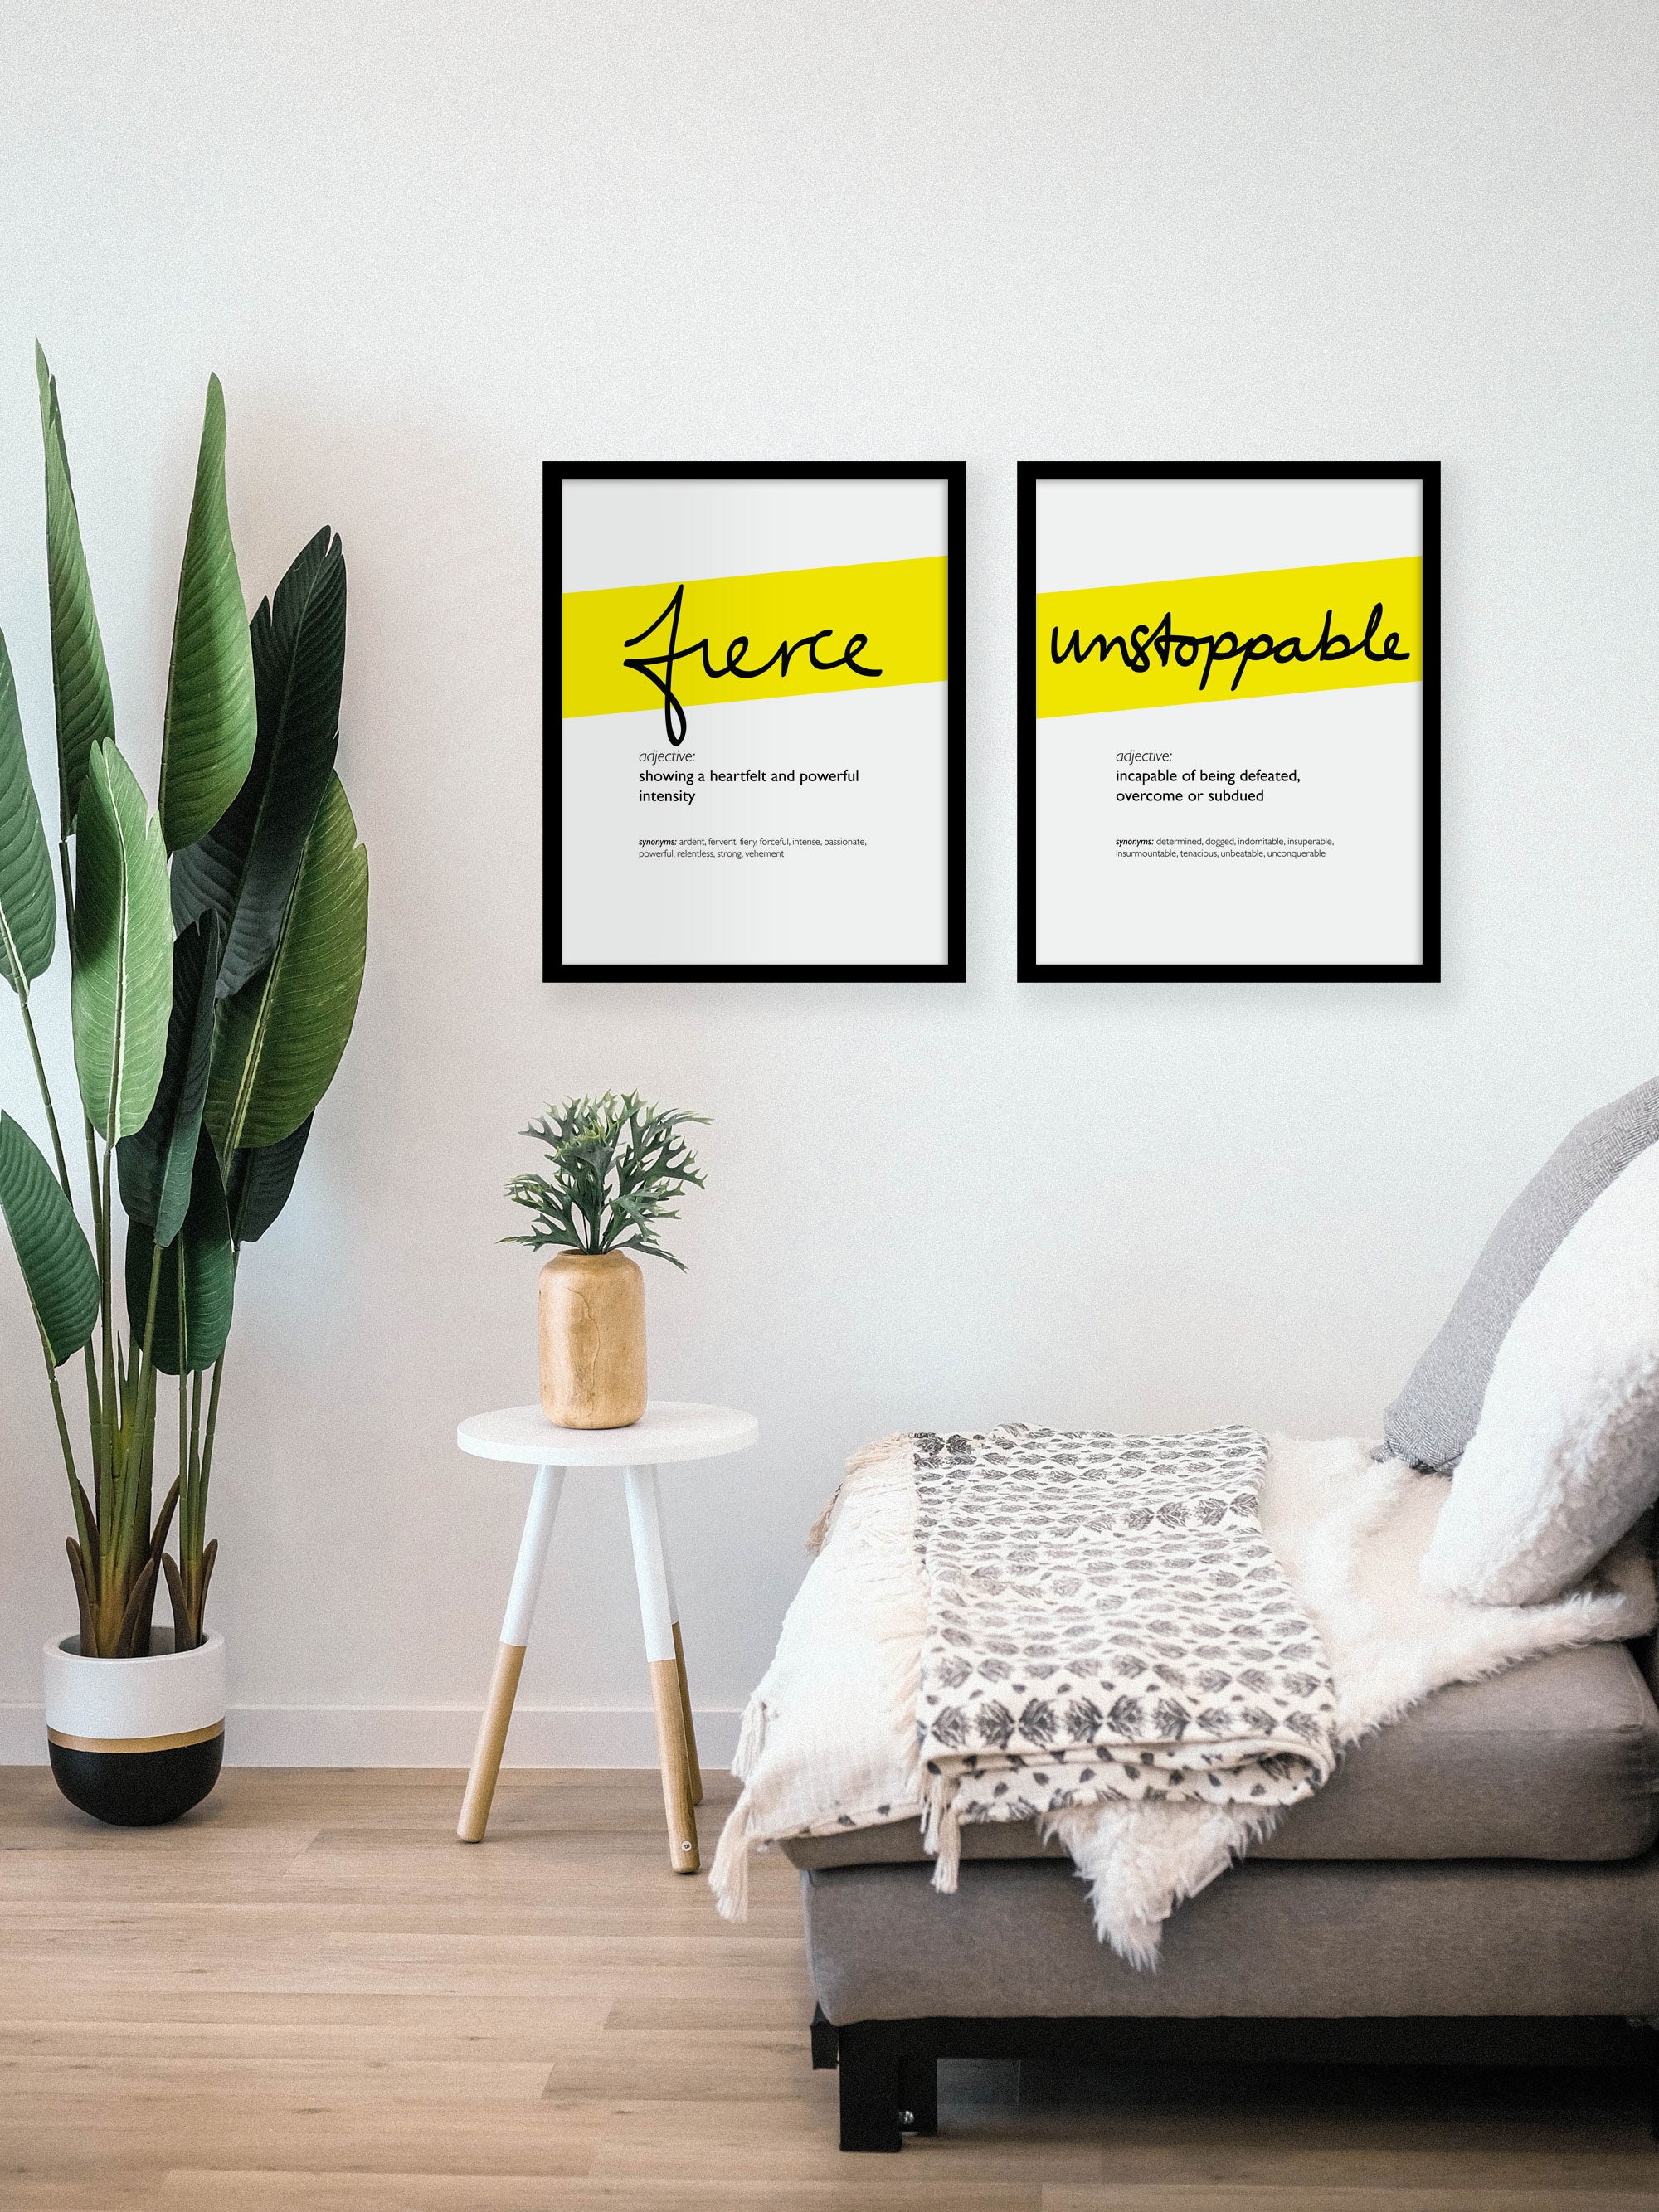 Framed Yellow Fierce Print With Word Definition - High Quality, Affordable, Hand Written, Empowering, Self Love, Mantra Word Print. Archival-Quality, Matte Giclée Print - Brevity Jewelry